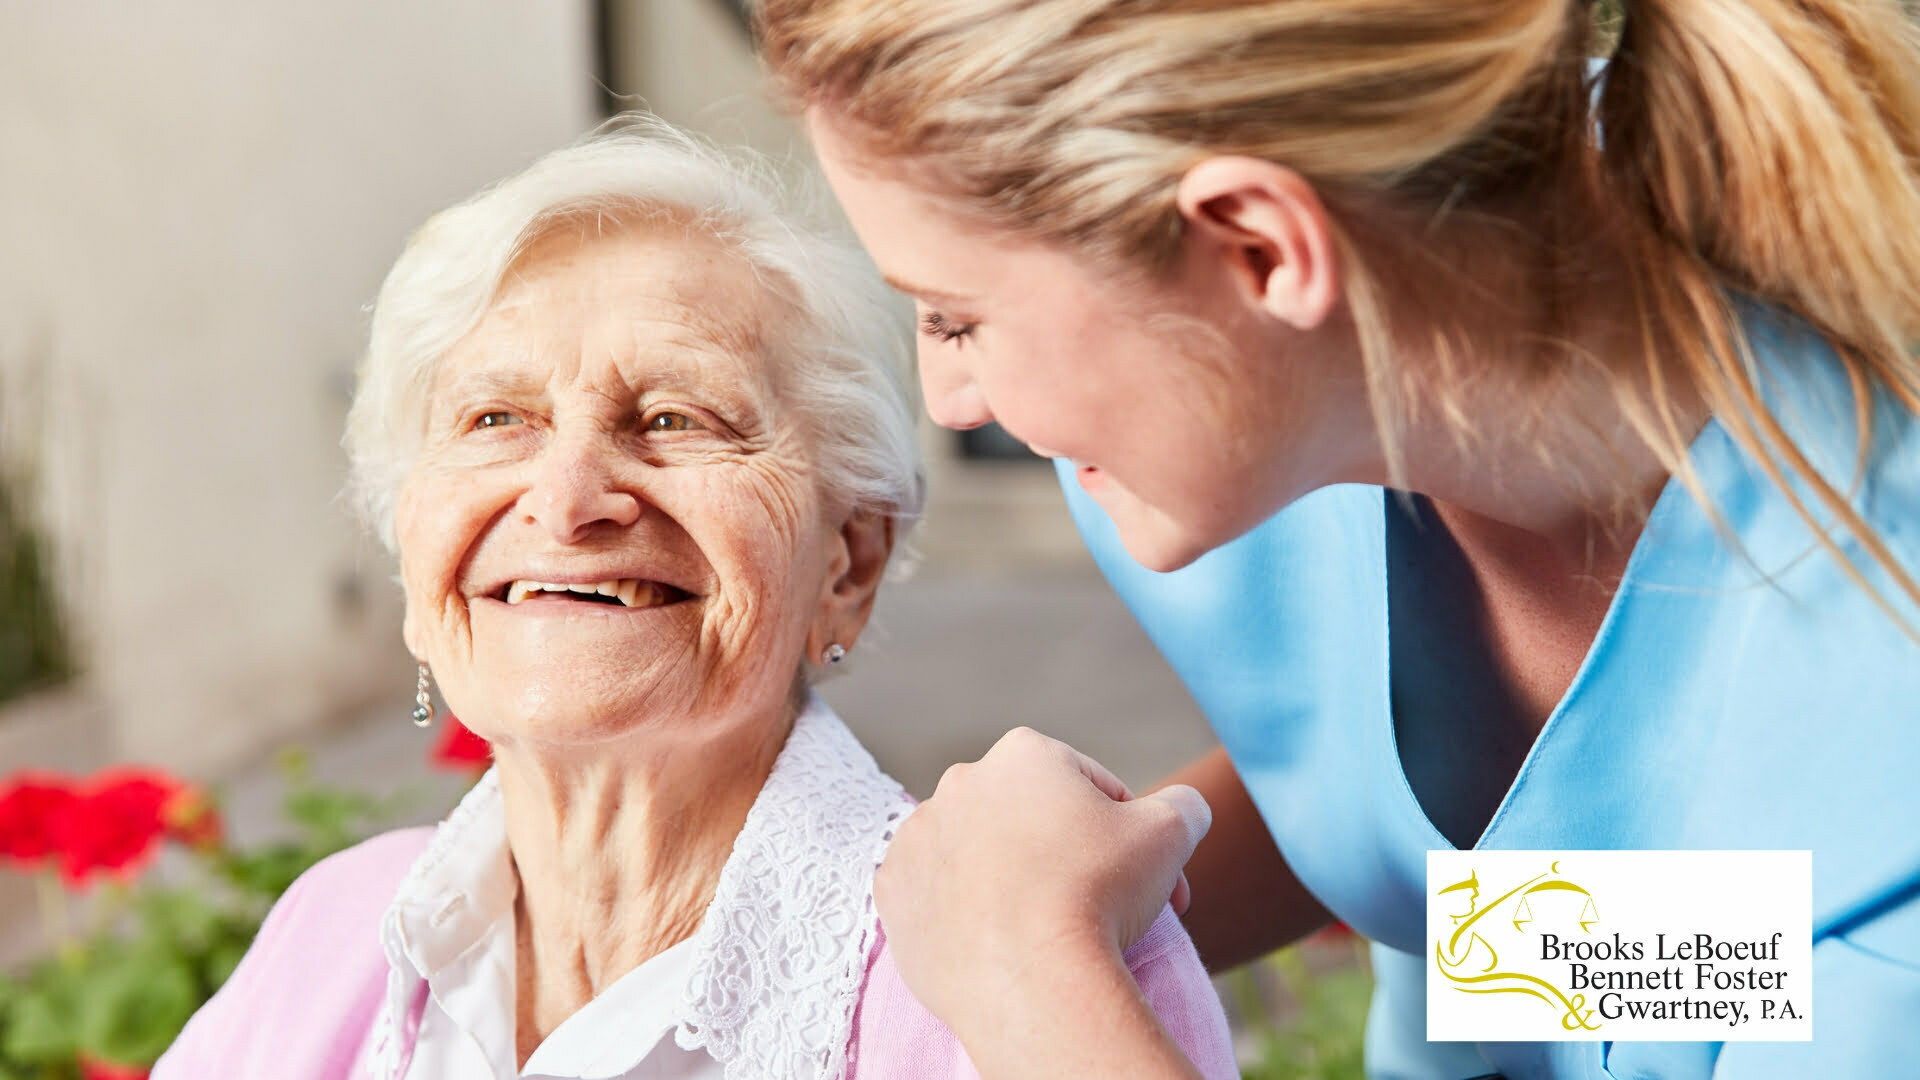 Elder Care Tips to Use When Your Loved One is in a Nursing Home This National Elder Law Month